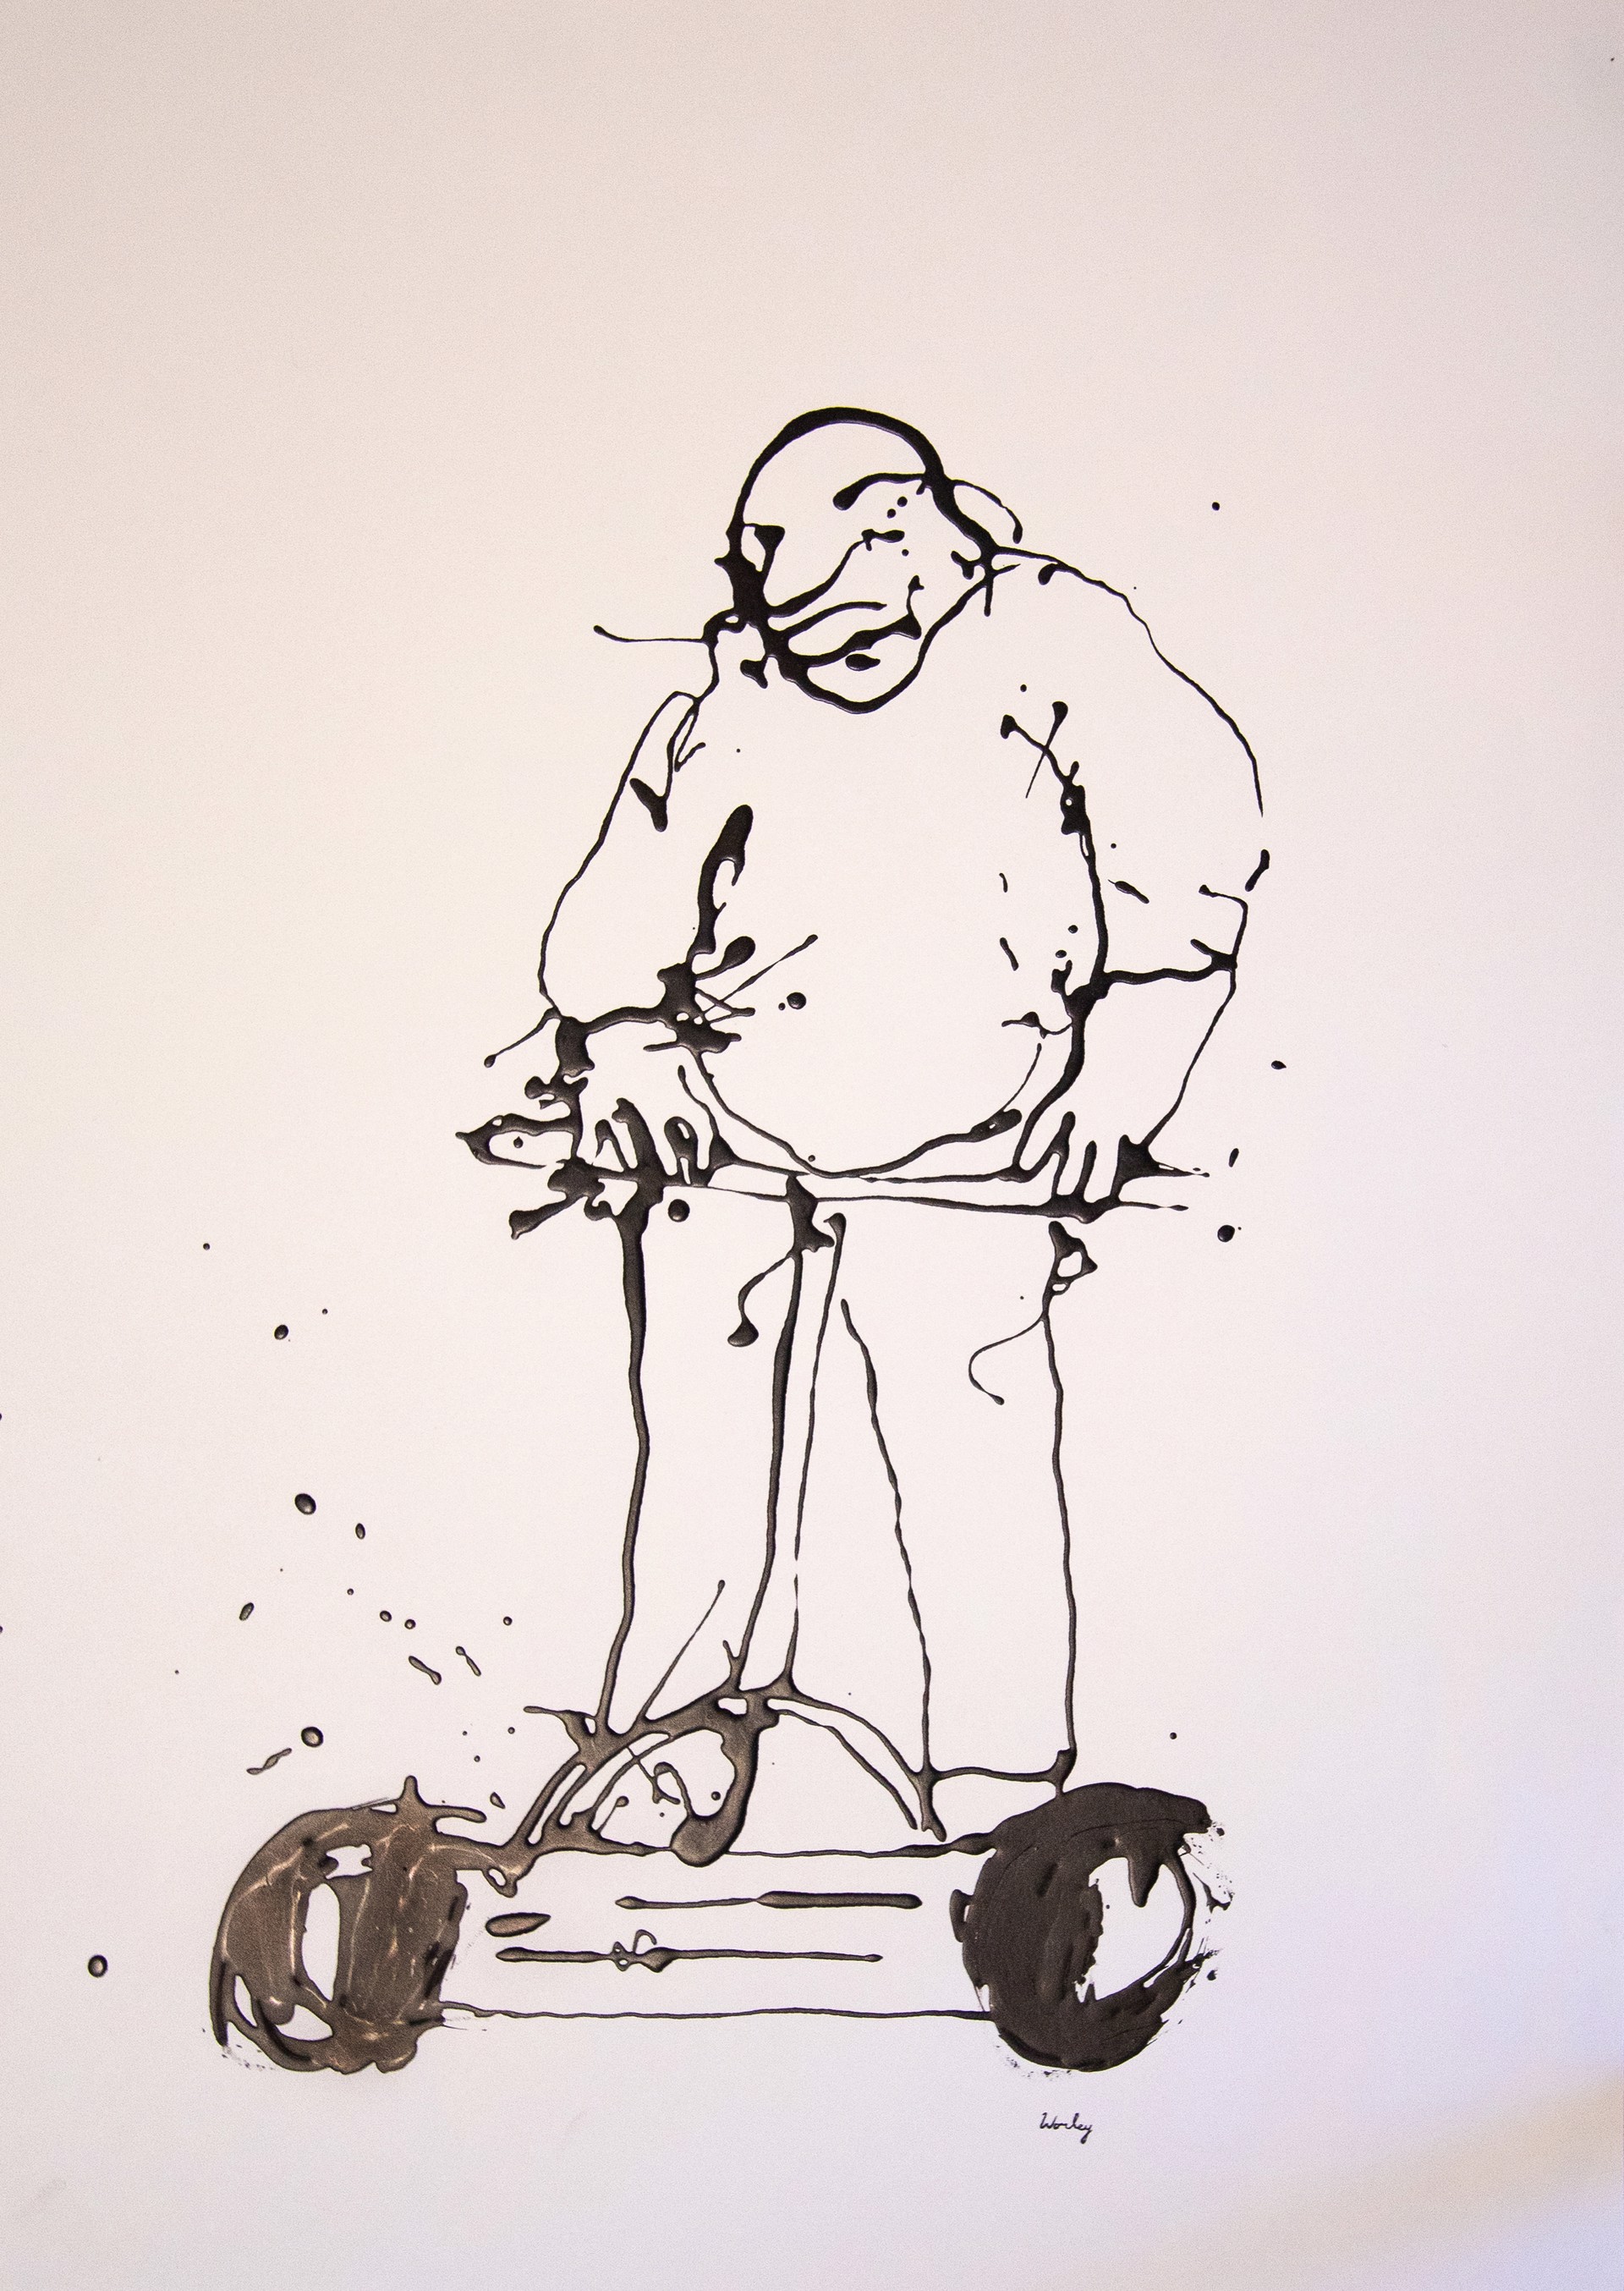 Man with push mower by Aaron Worley